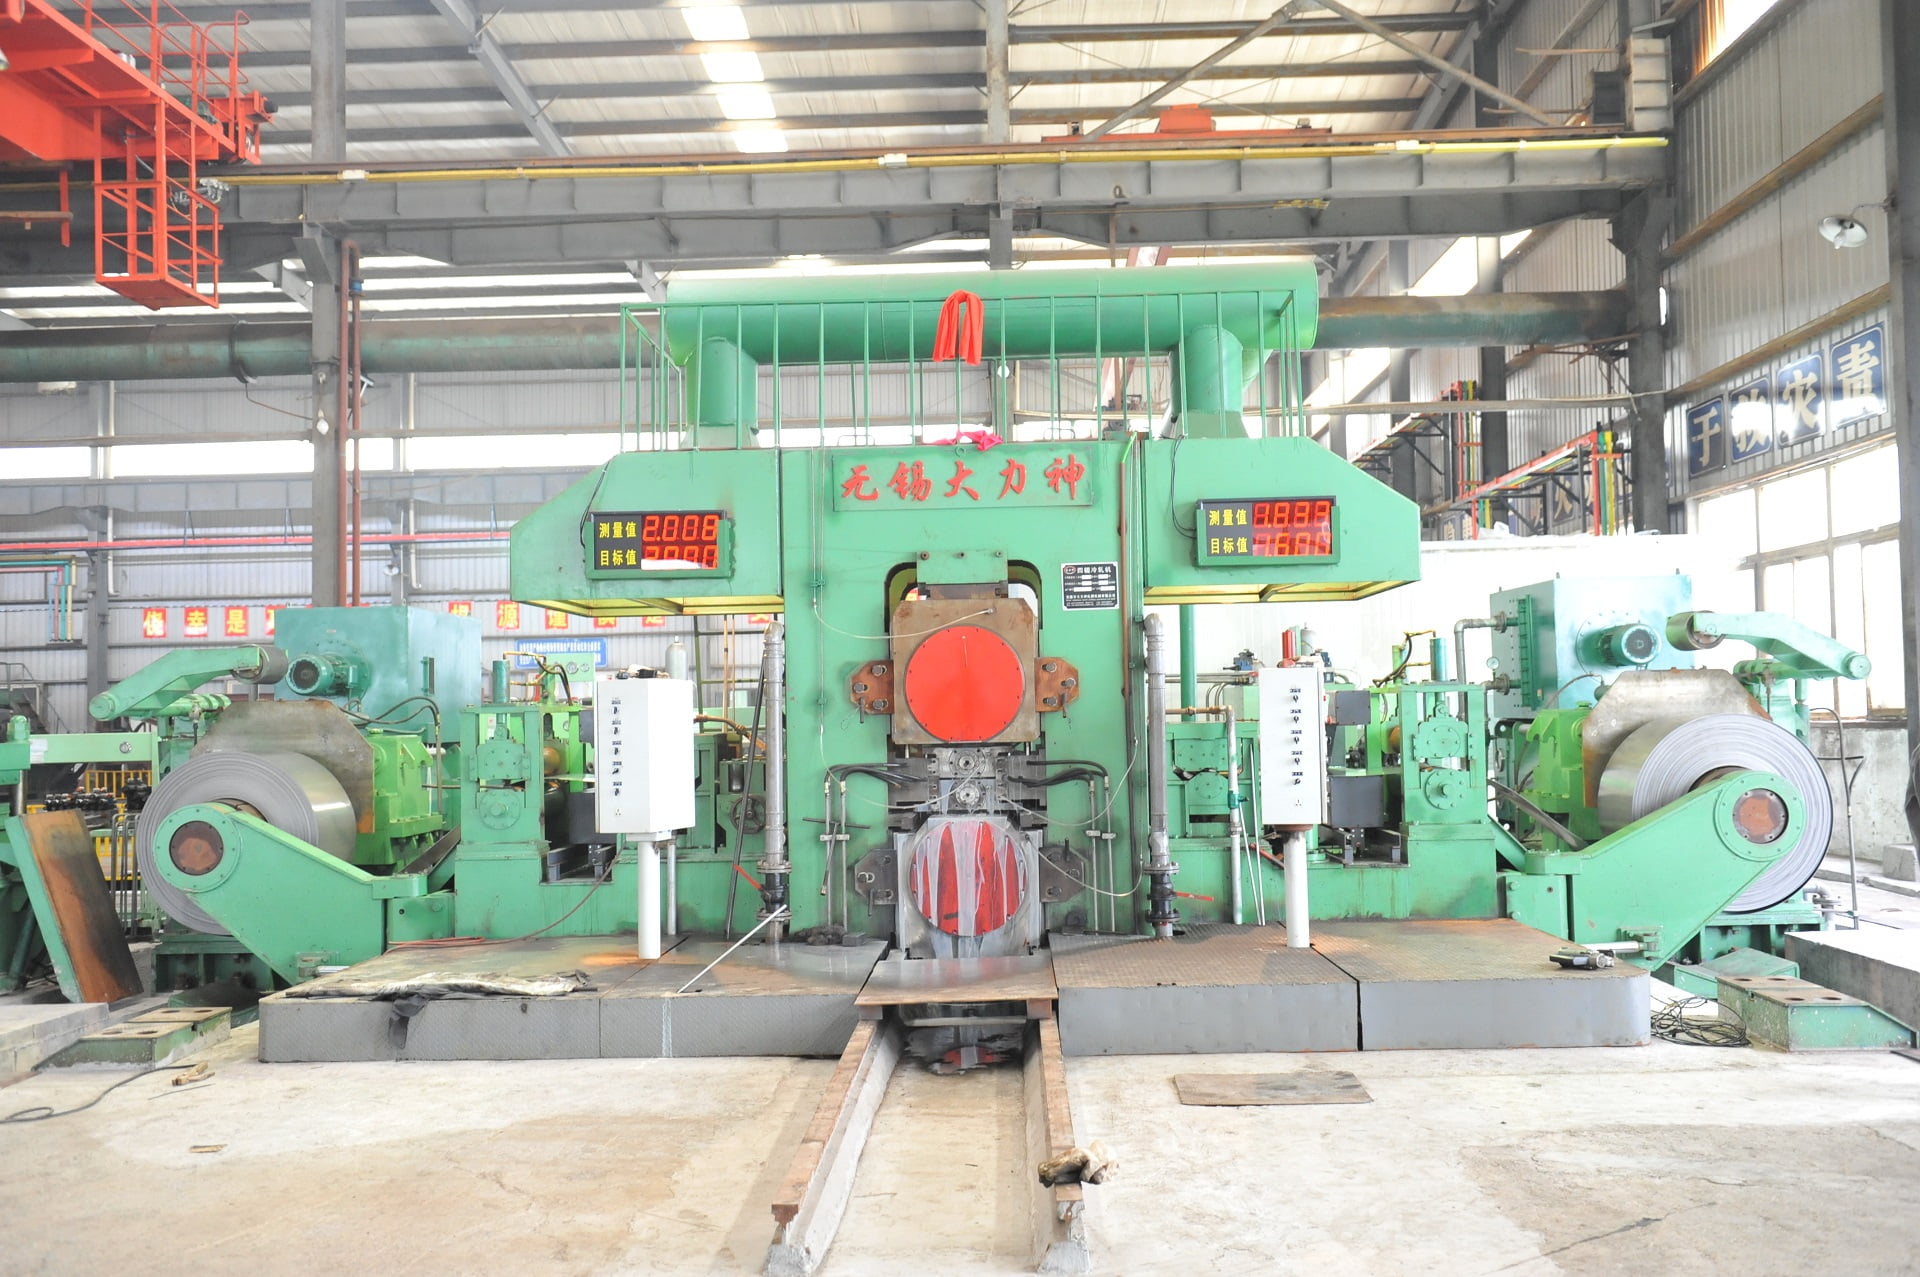 cold rolling mill, reversing cold rolling mill, 4 hi cold rolling mill - DLS